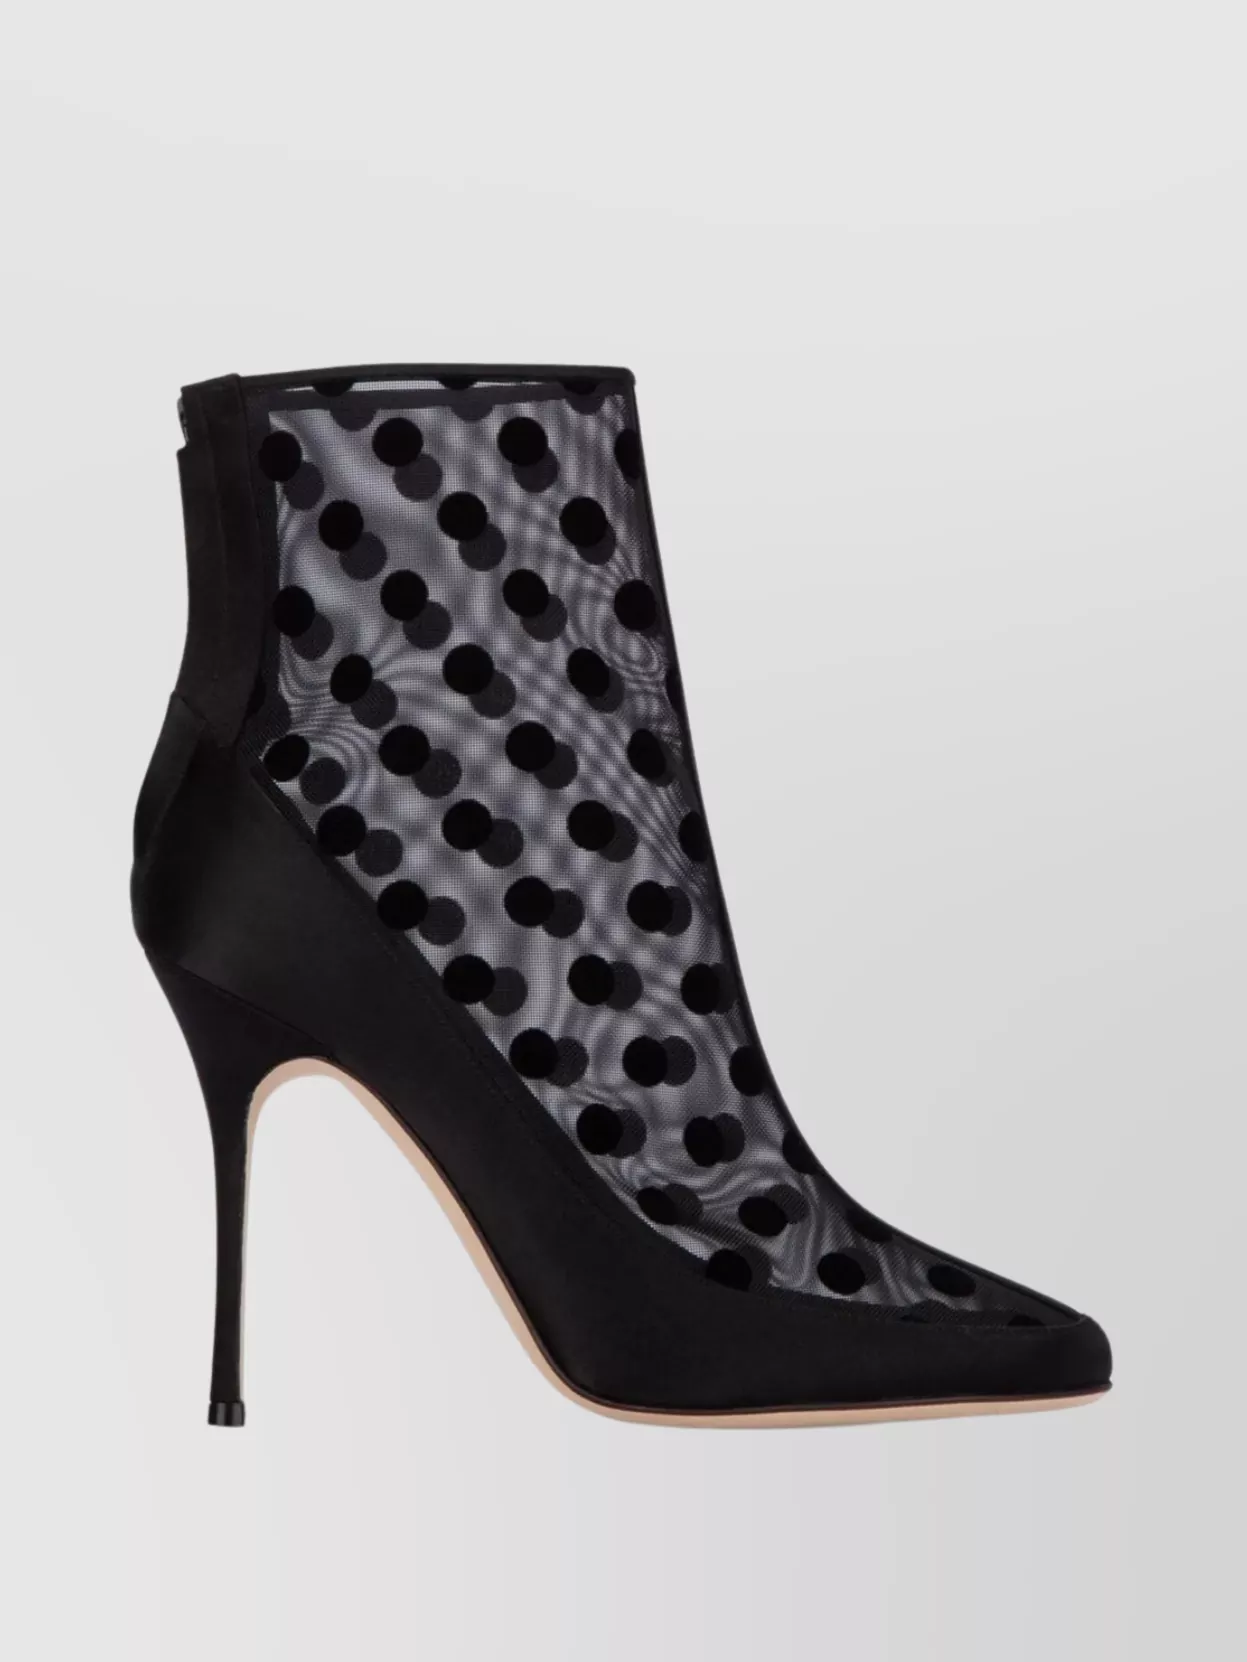 Shop Manolo Blahnik Mesh And Satin Ankle Boots With Pointed Toe And Stiletto Heel